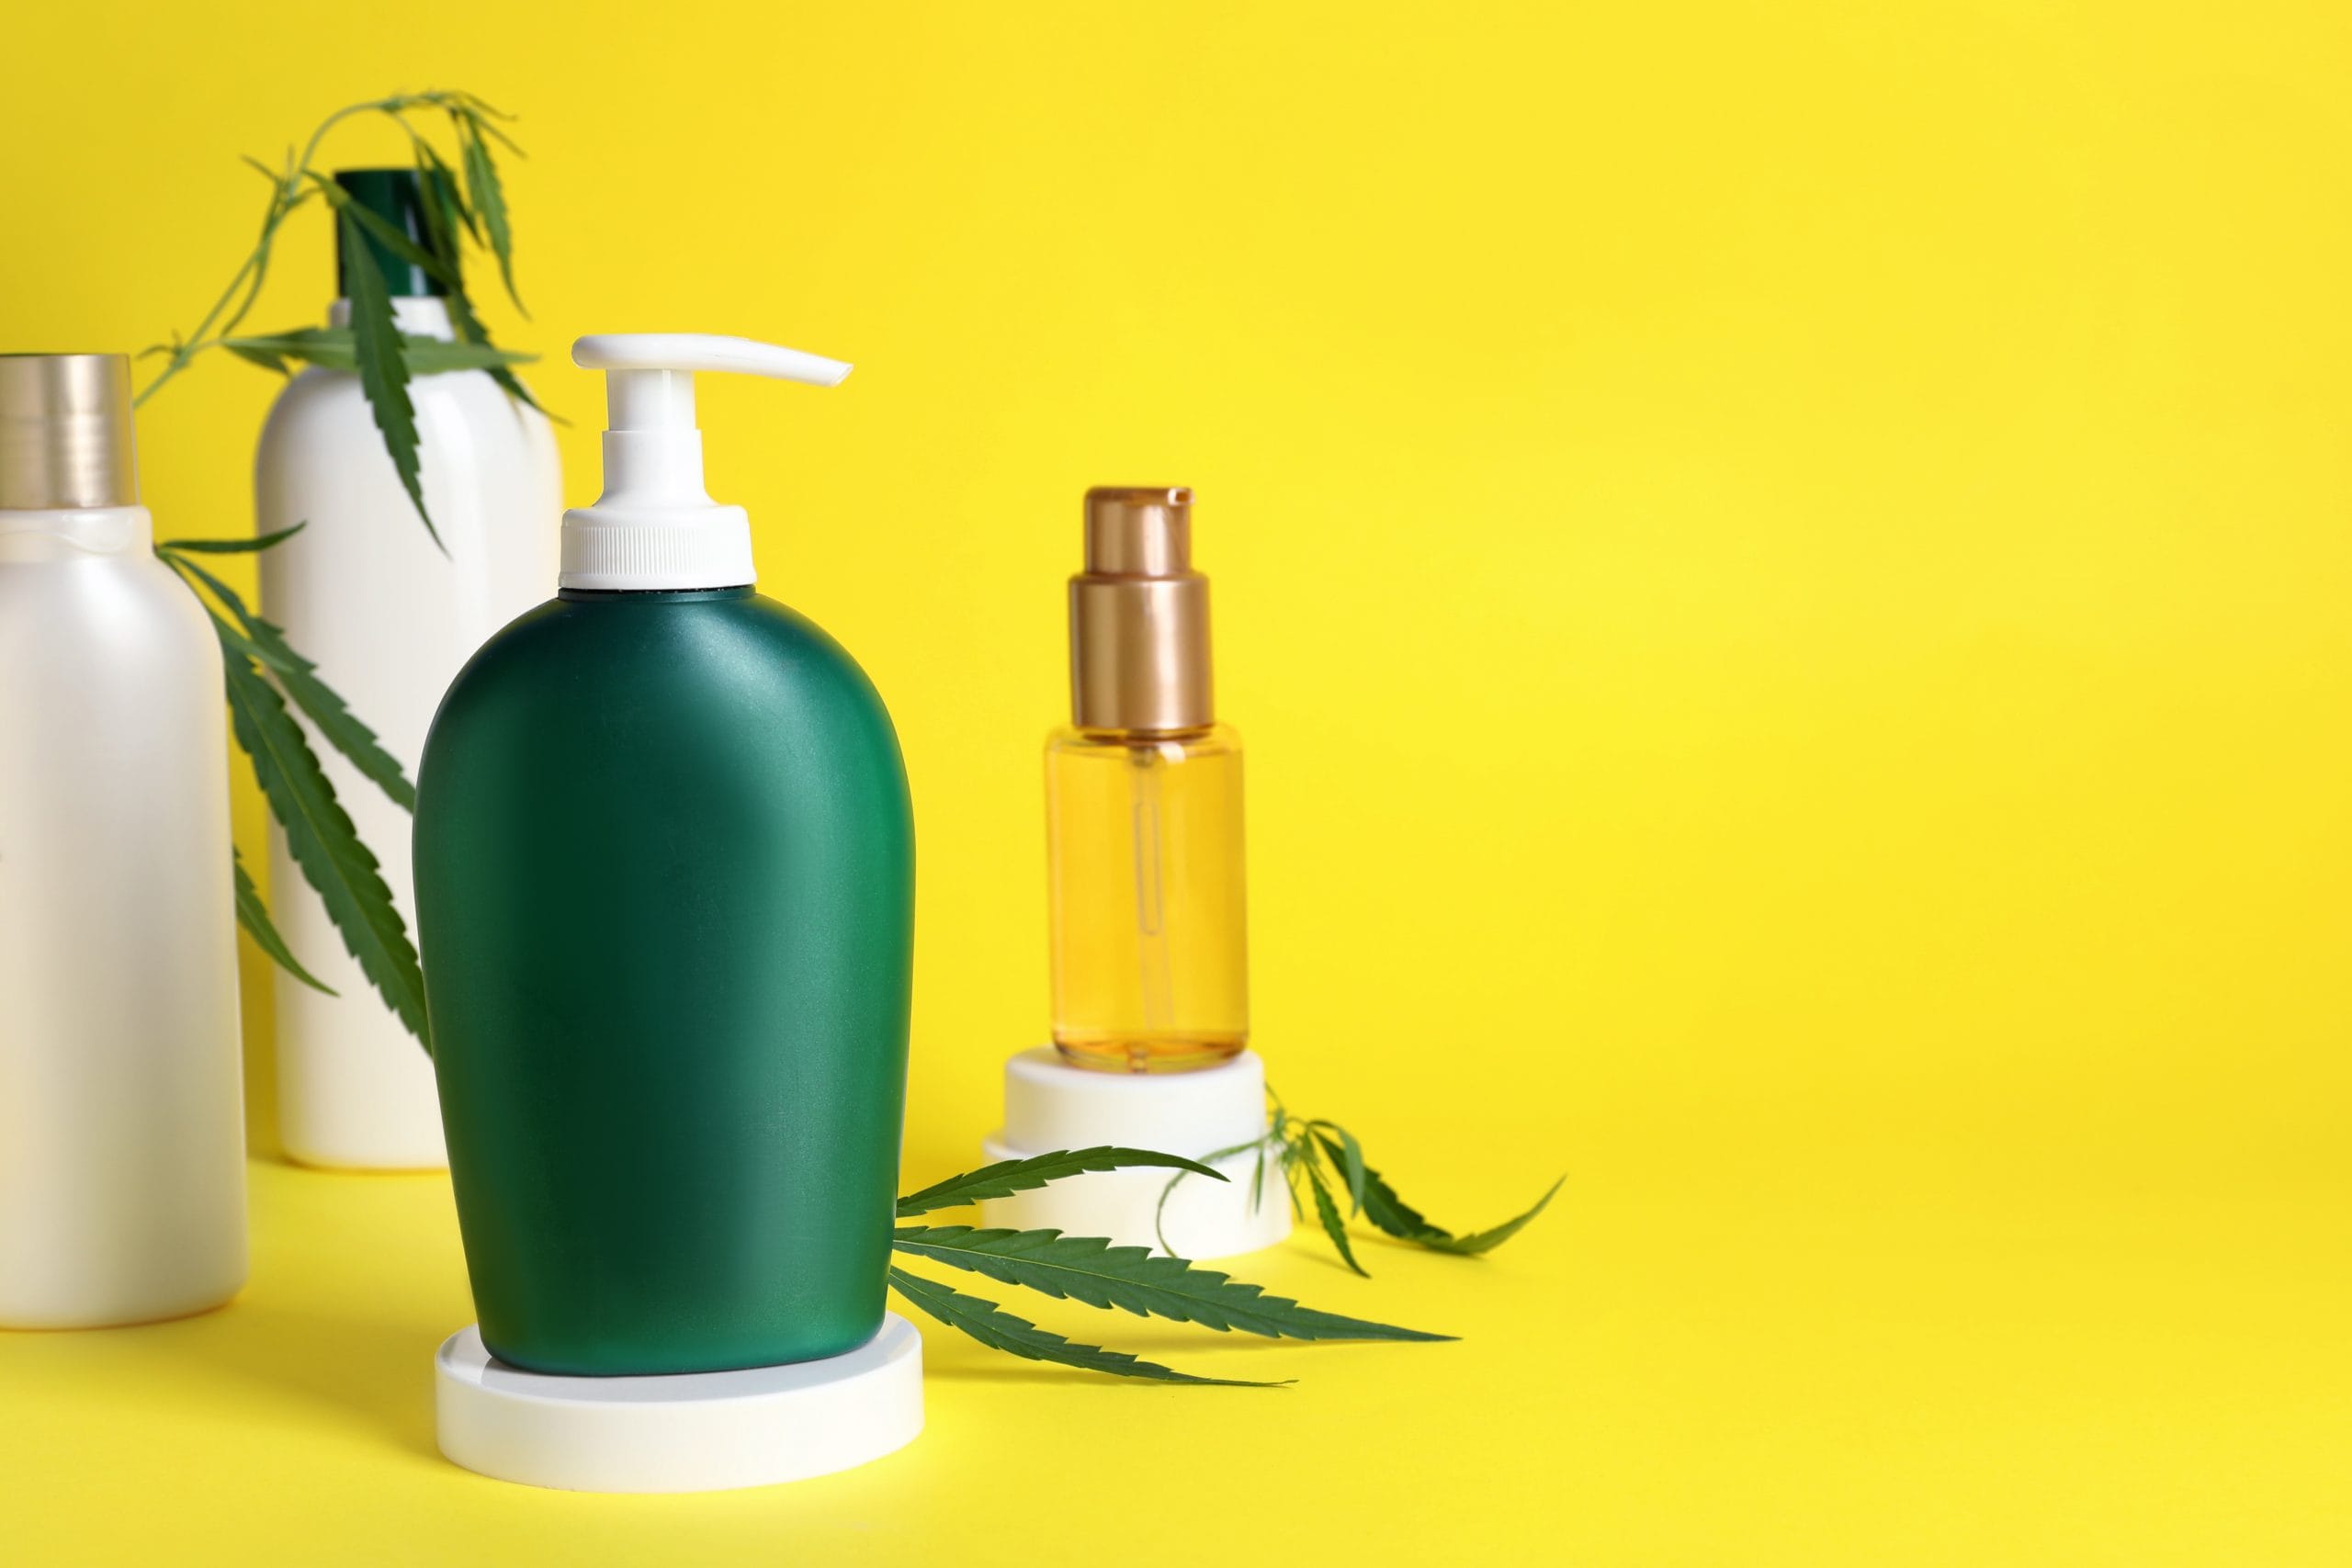 hemp seed leaf: A collection of bottles containing CBD against a yellow background.